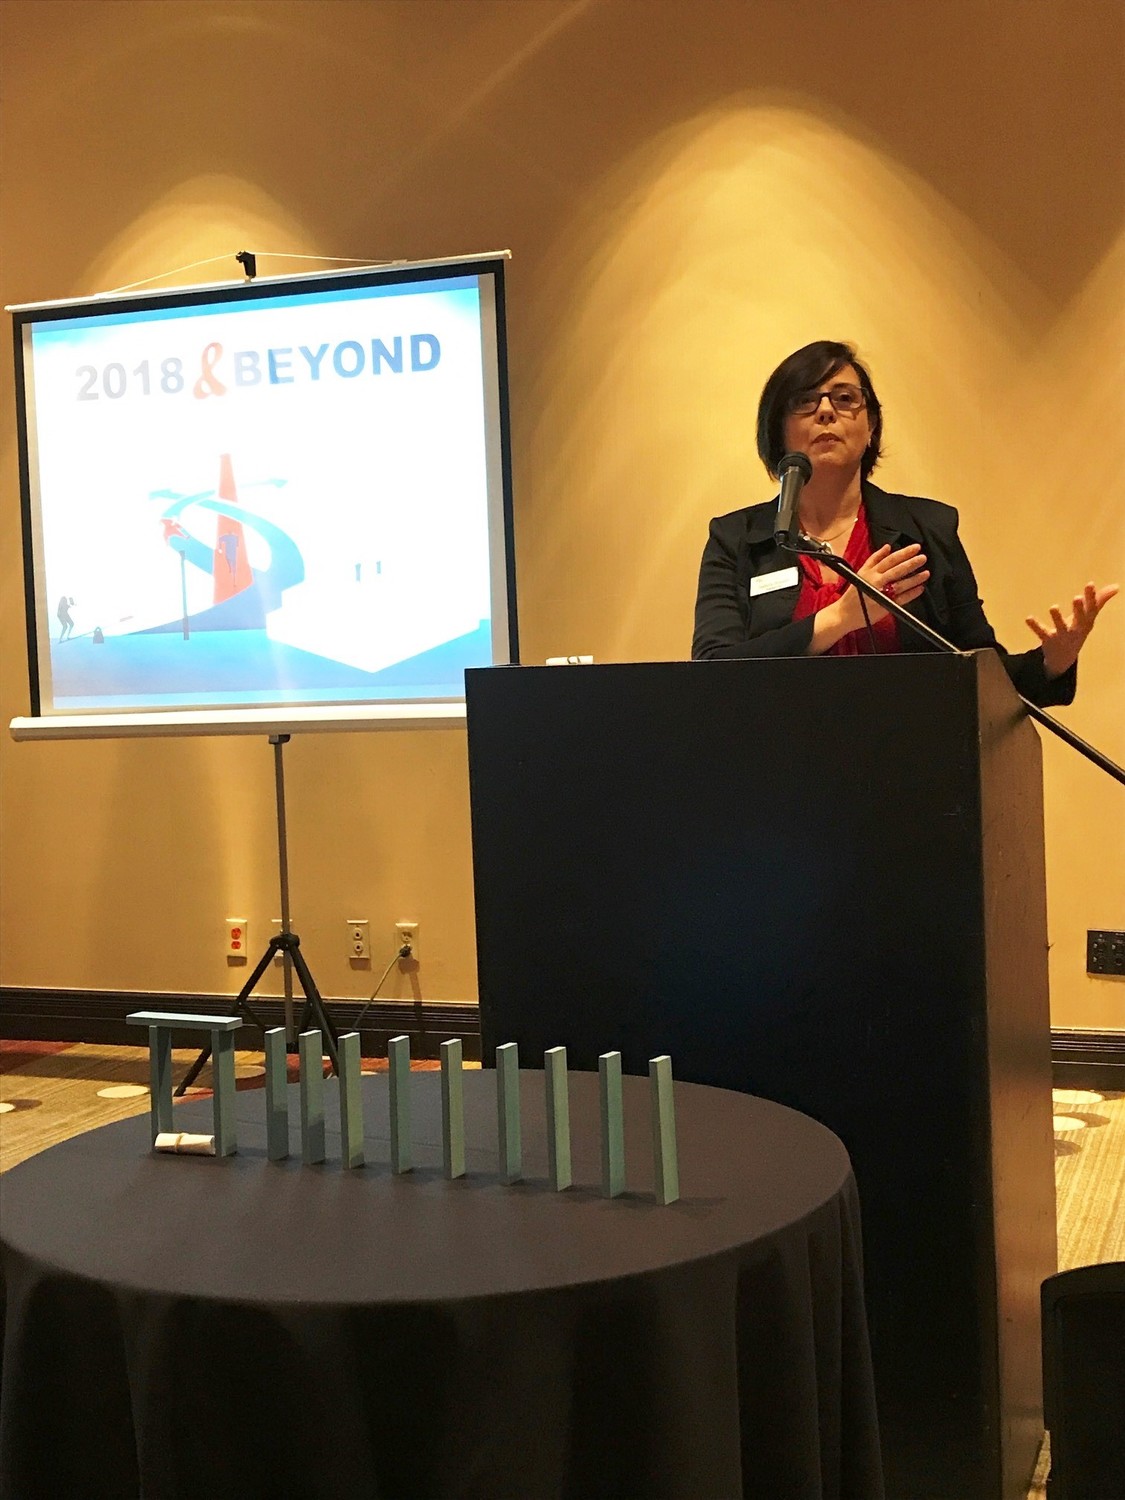 St. Johns County Chamber of Commerce President/CEO Isabelle Renault presents the Chamber’s 2018 & Beyond plan Feb. 14 at Sawgrass Marriott Golf Resort & Spa in Ponte Vedra.